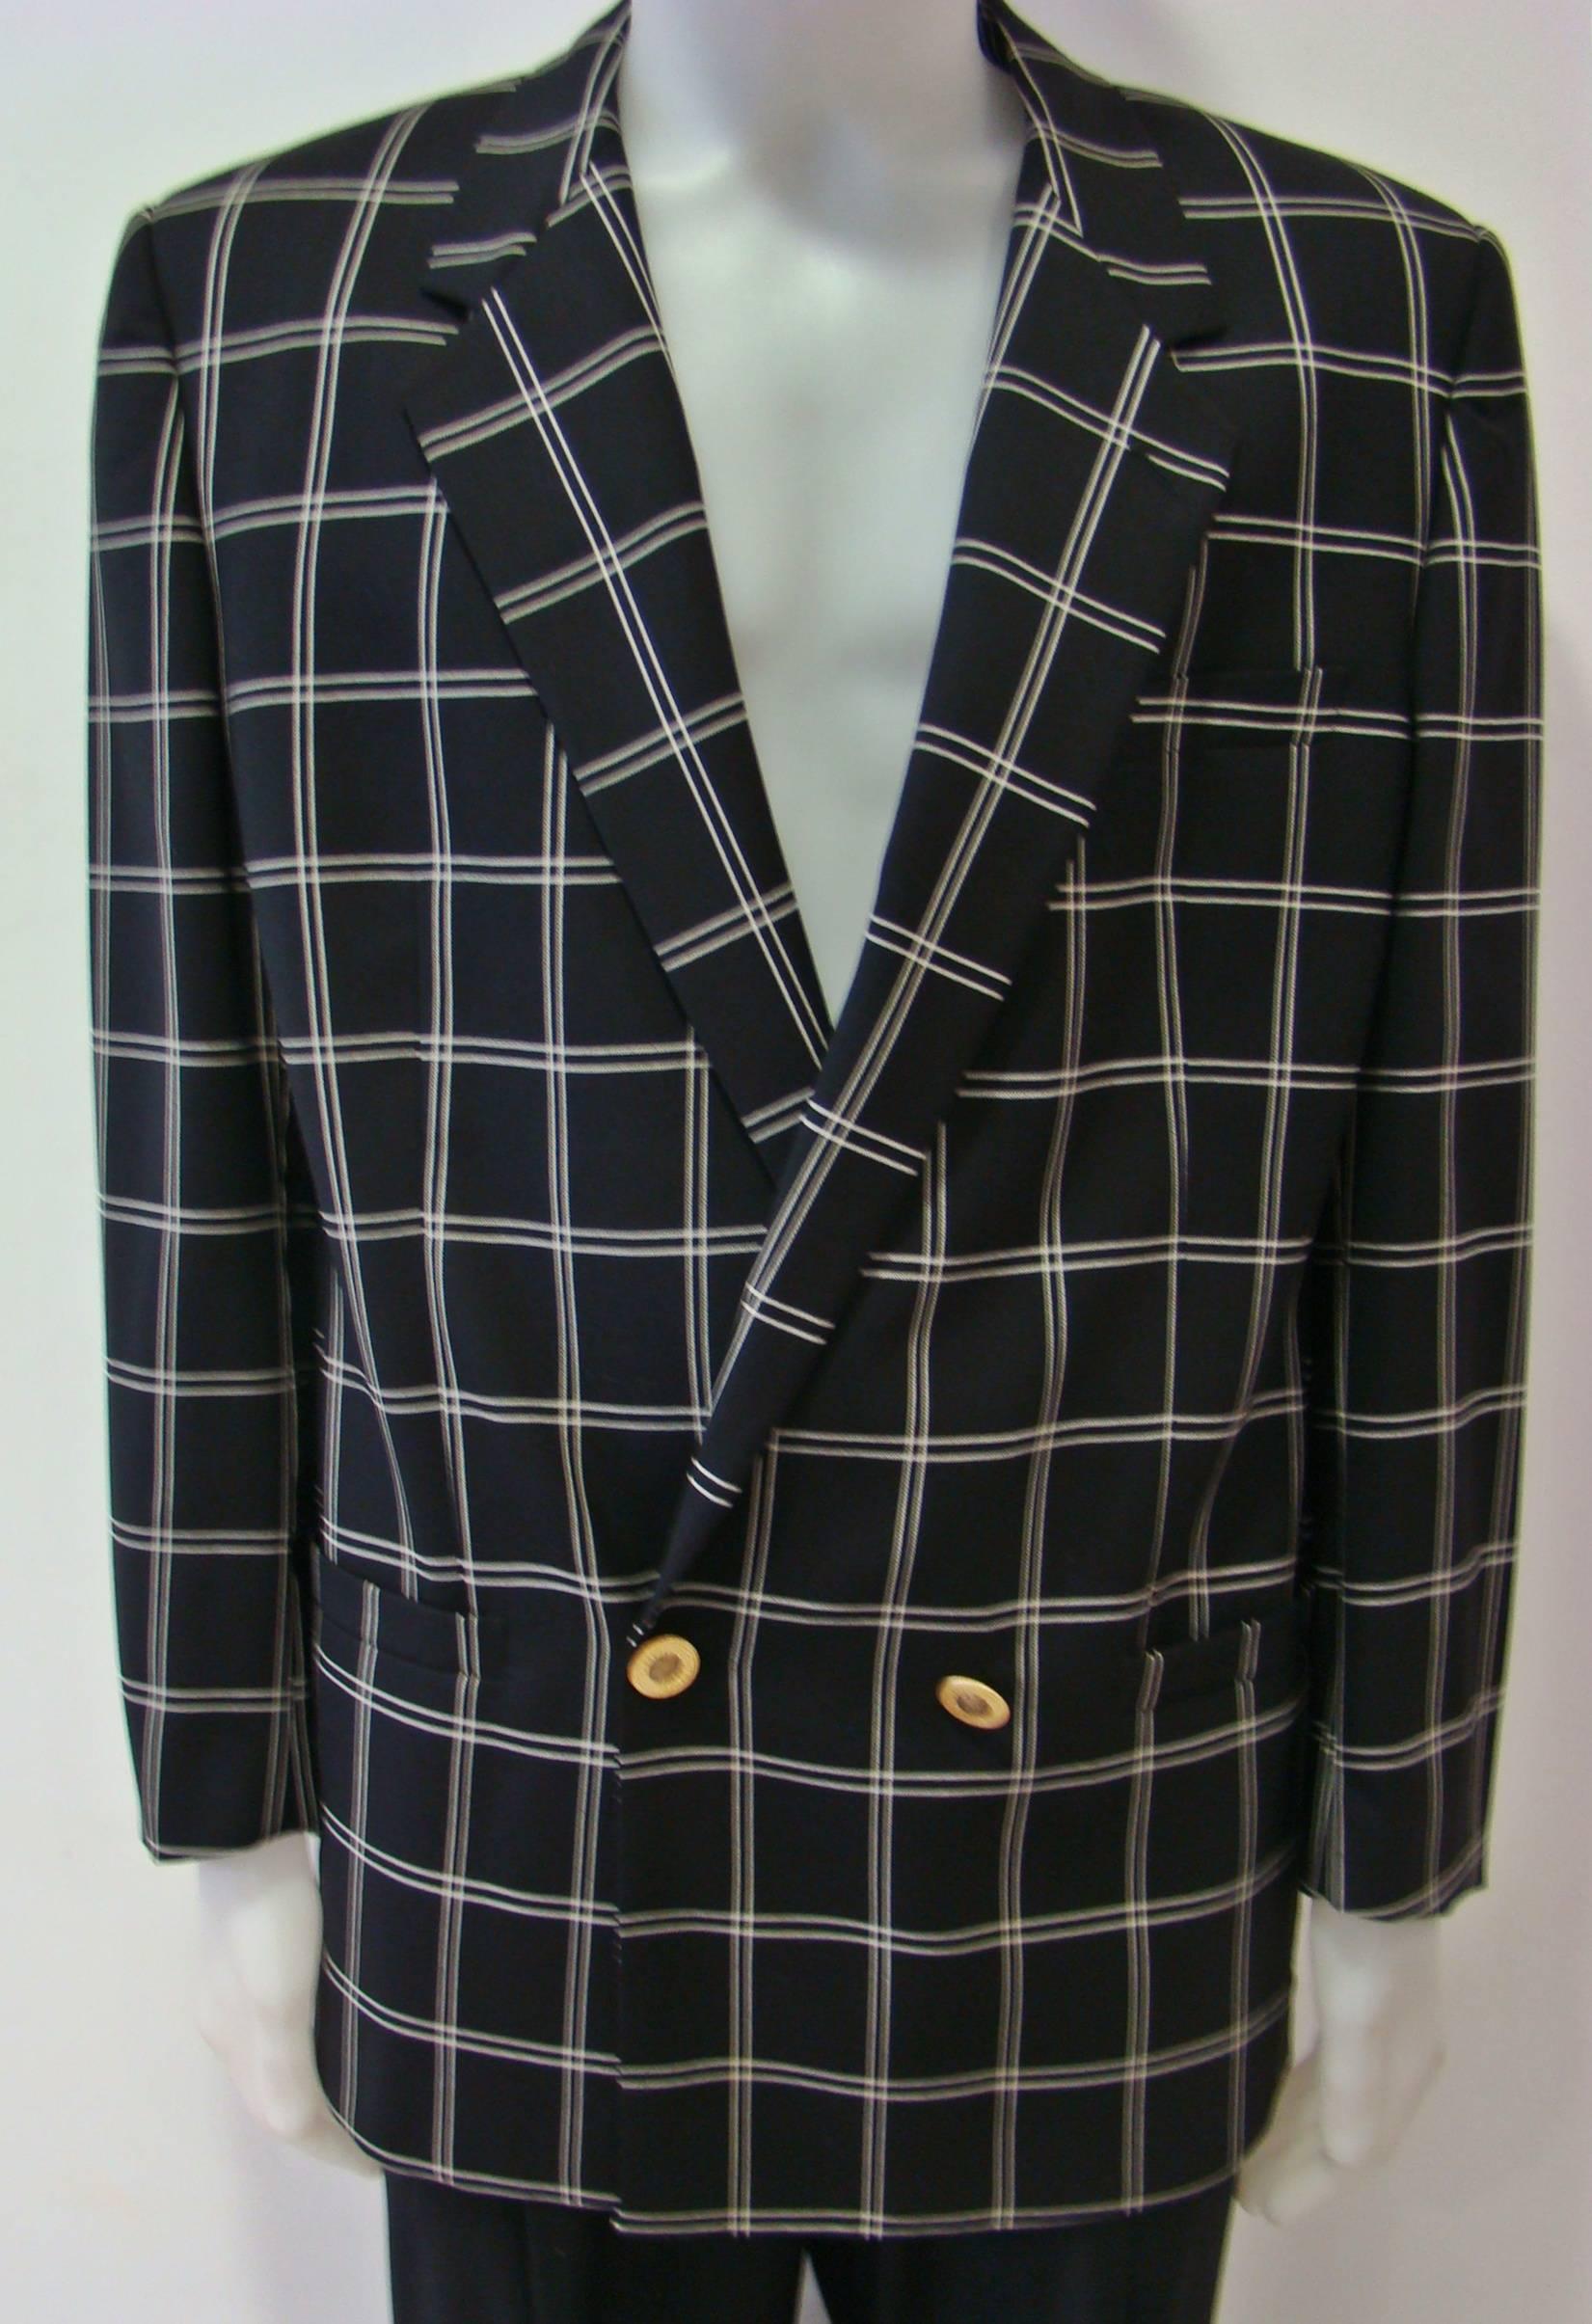 Unique Gianni Versace Checked Jacket With Smoking Pants Suit In New Condition For Sale In Athens, Agia Paraskevi